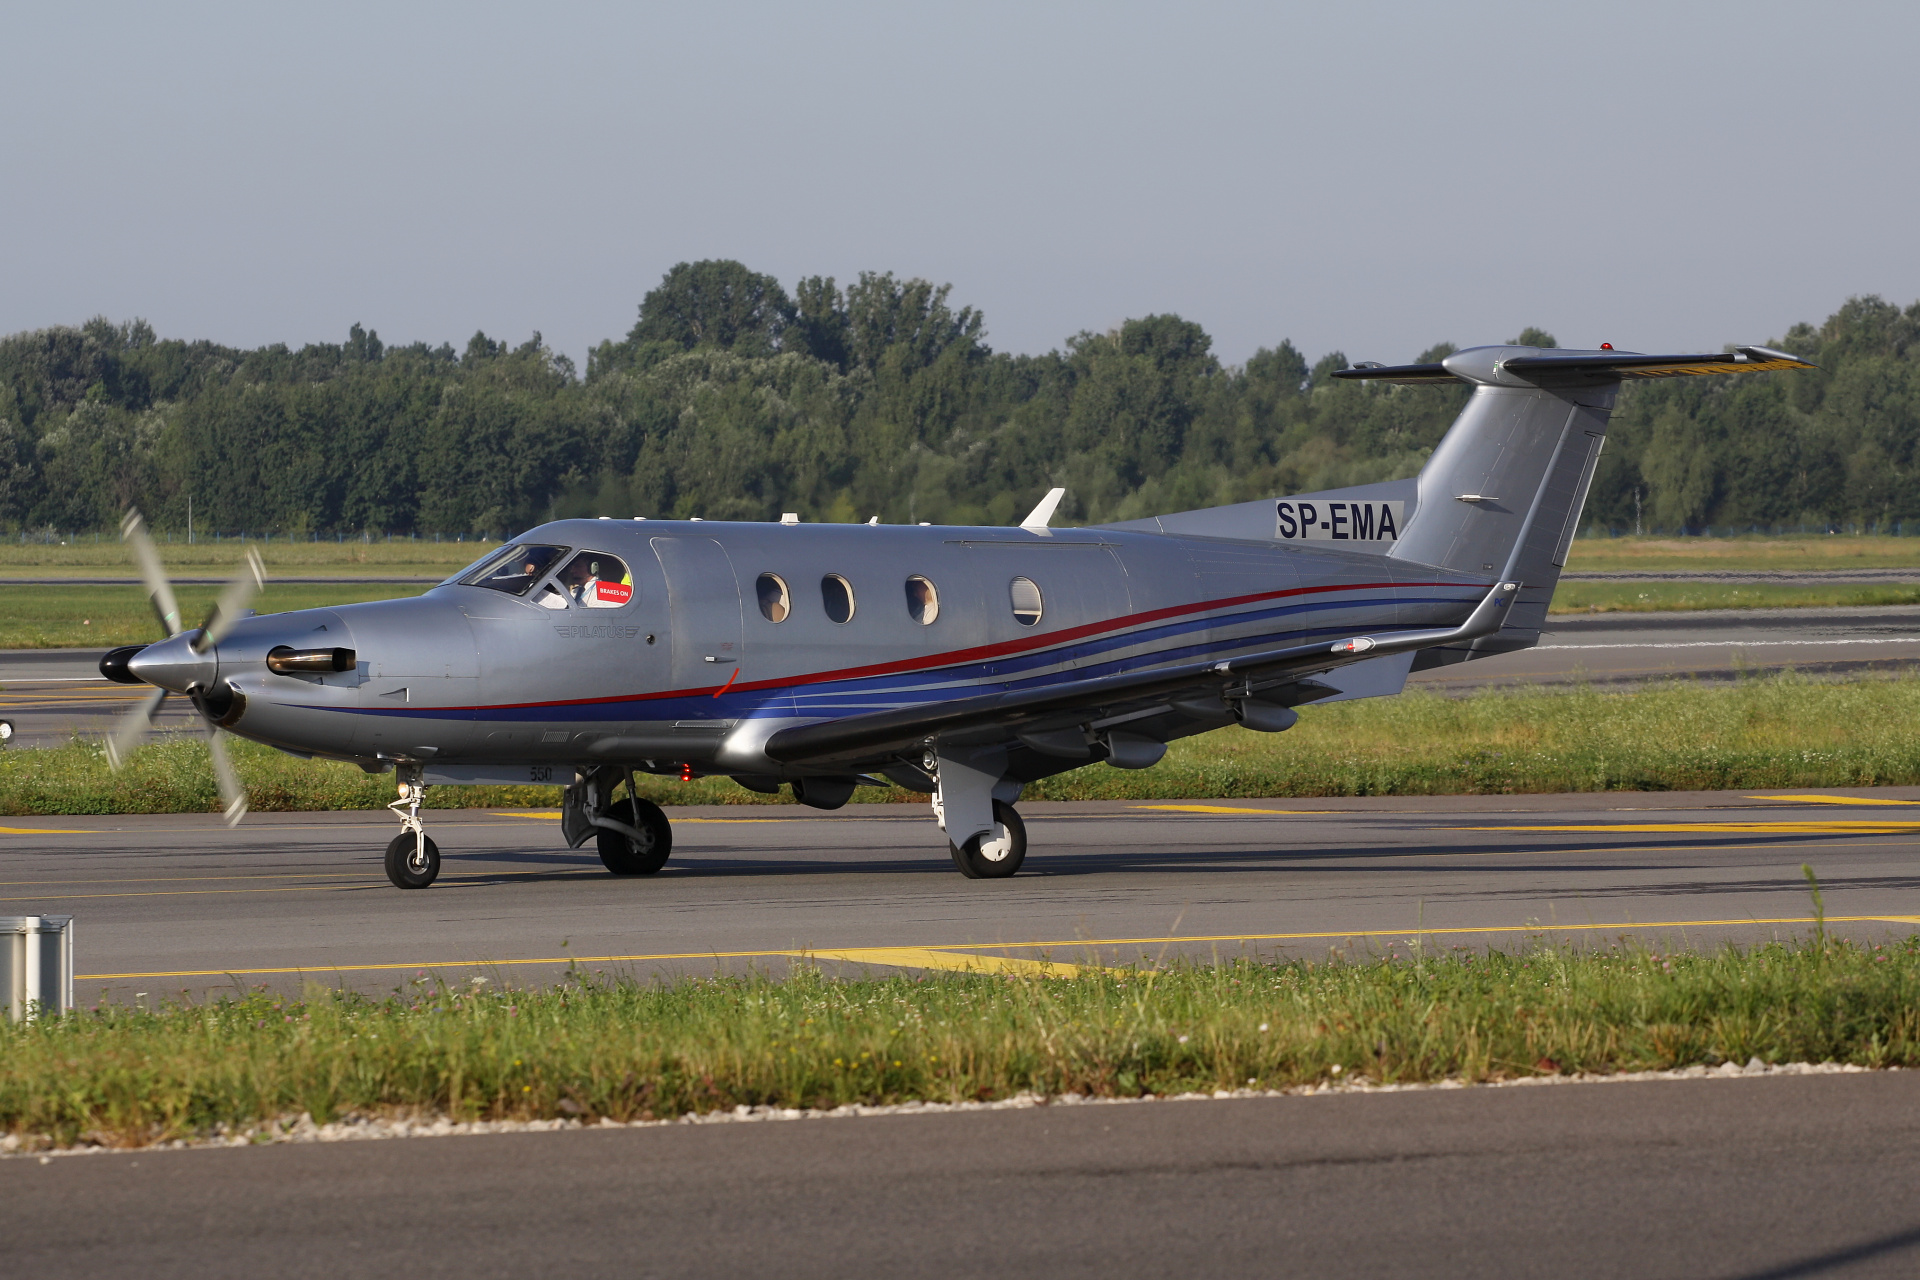 PC-12/45, SP-EMA, private (Aircraft » EPWA Spotting » Pilatus PC-12 and revisions)